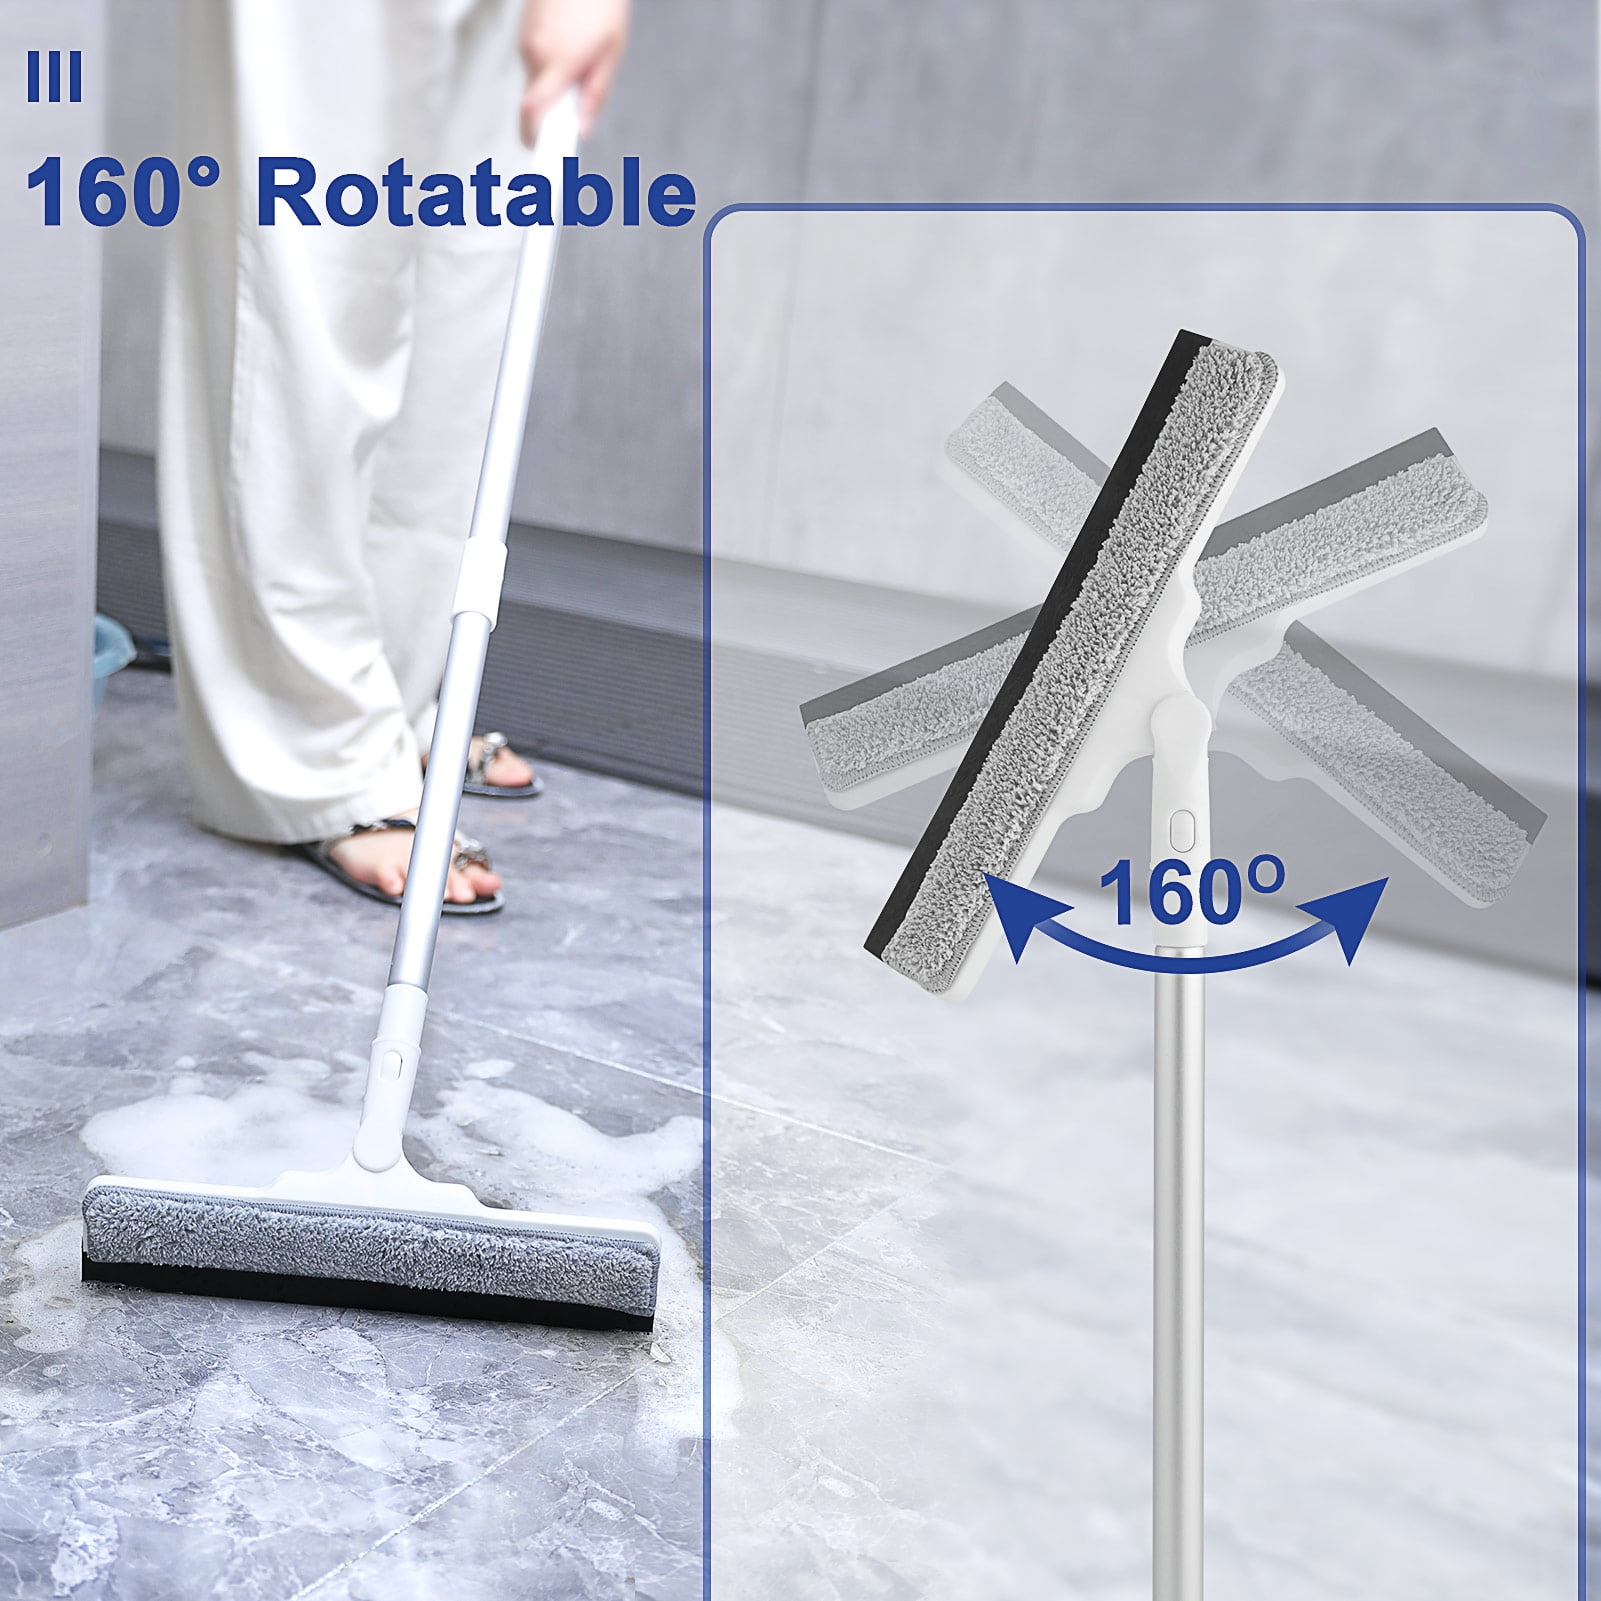  2 in 1 Window Cleaner Shower Squeegee with 12 Durable  Squeegee,57.8 Long Handle,160°Rotatable Window Squeegee for Shower Glass  Door,Car Windshield,Mirror,Window-2 Replacement Microfiber Pads : Health &  Household